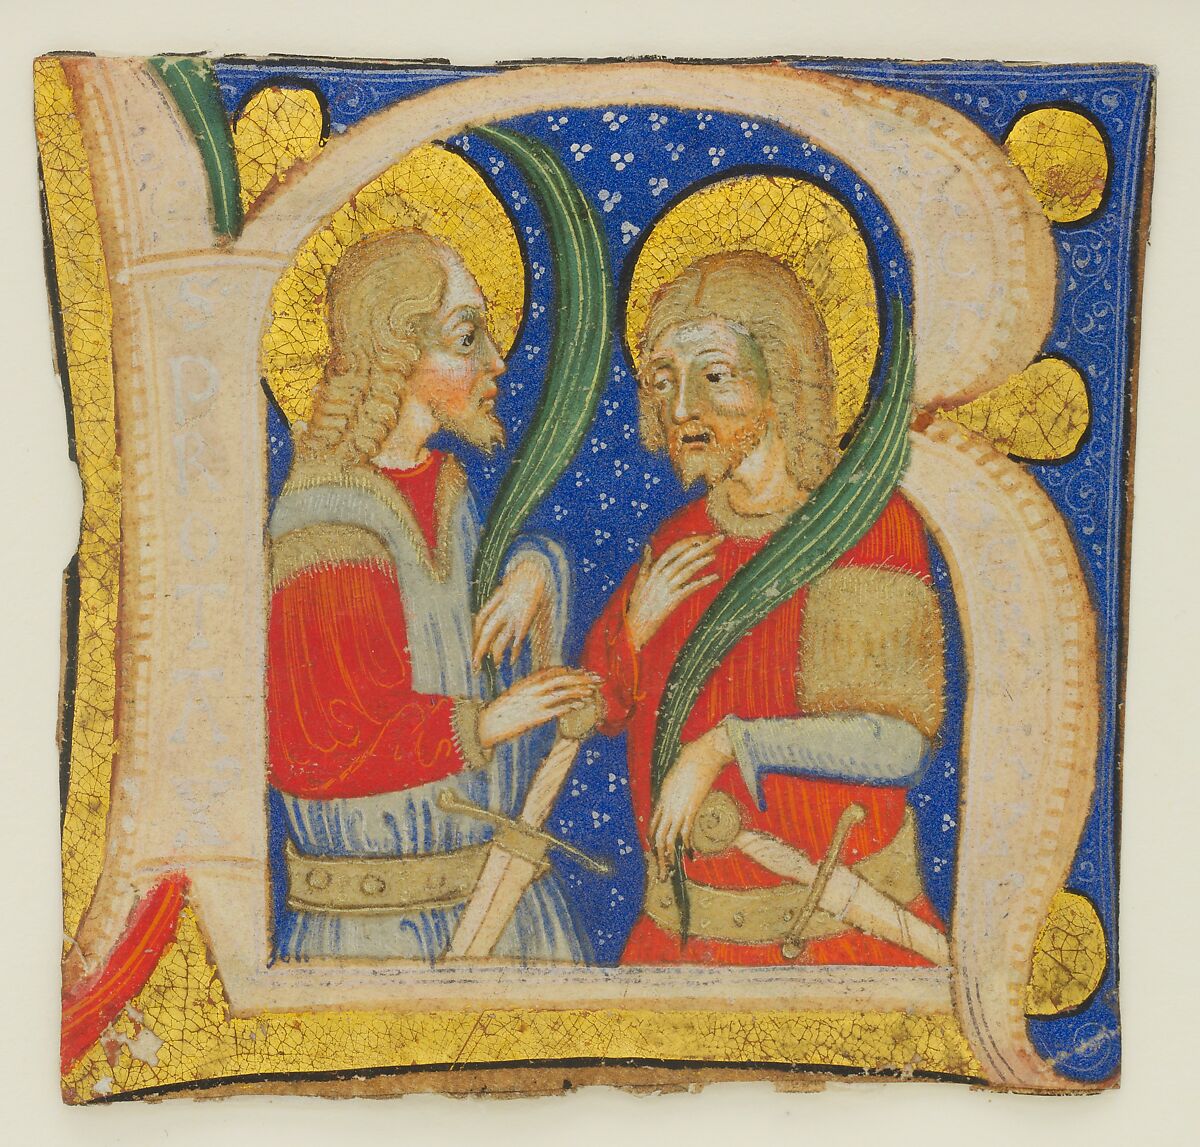 Manuscript Leaf Cutting showing an Illuminated Initial R with St. Protasius and St. Gervasius, Olivetan Master (Italian, active Milan, ca. 1425–ca. 1450), Tempera, gold, and ink on parchment, Italian 